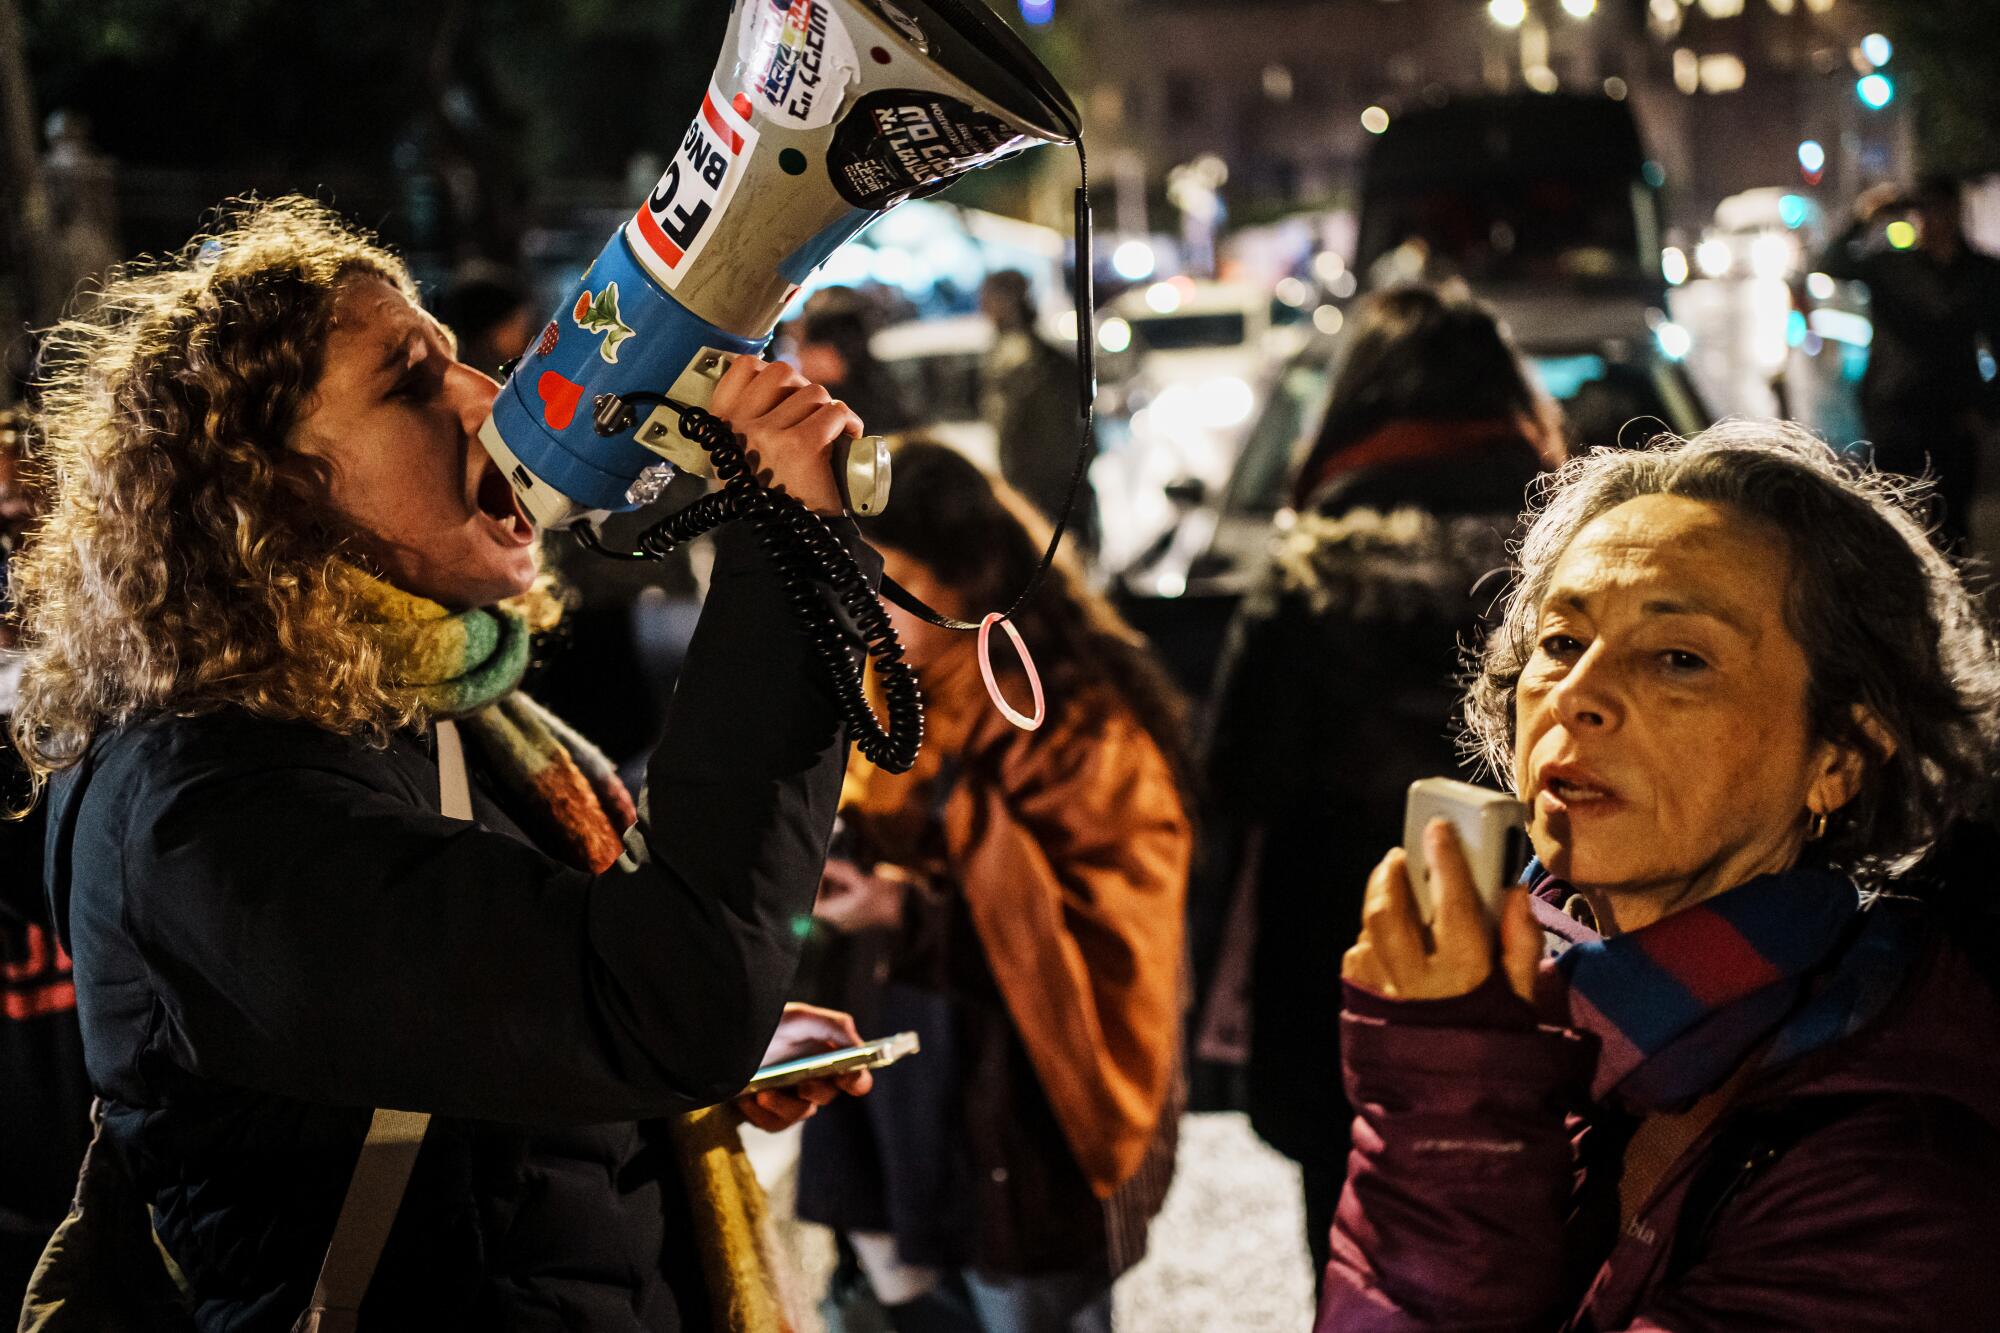 A woman speaks into a raised bullhorn in a crowd.